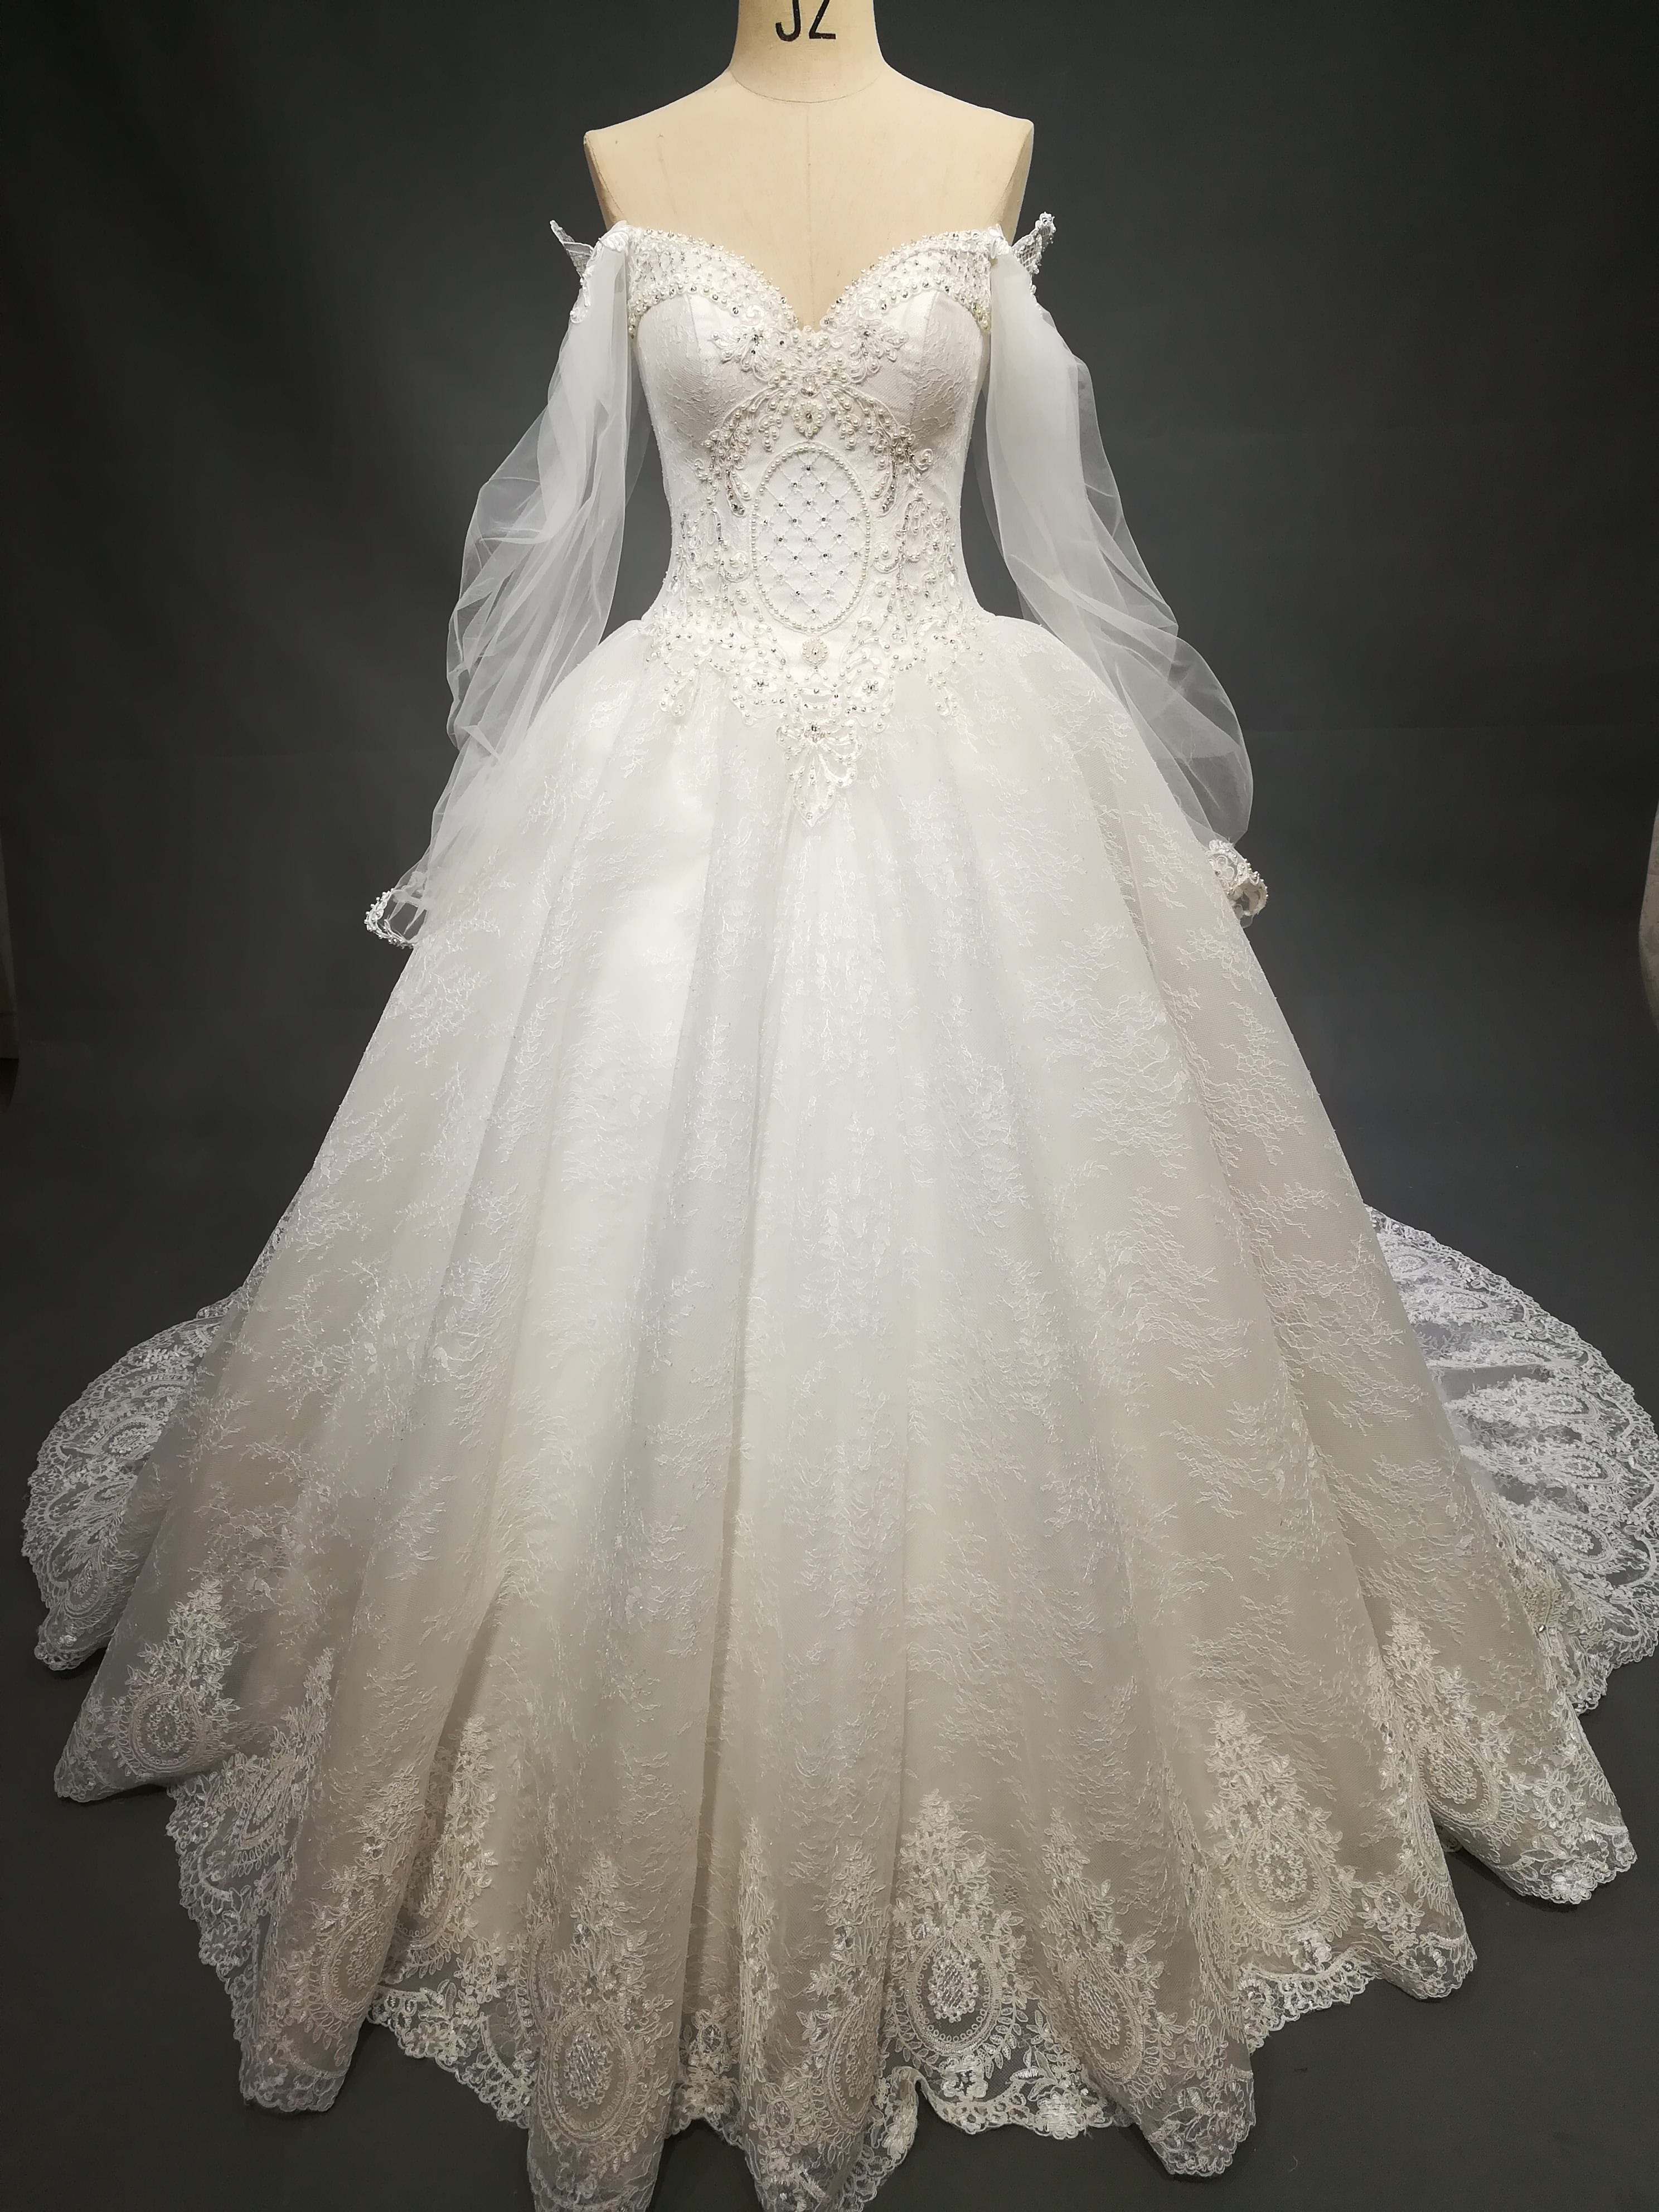 Romantic long sleeve vintage style wedding dresses from